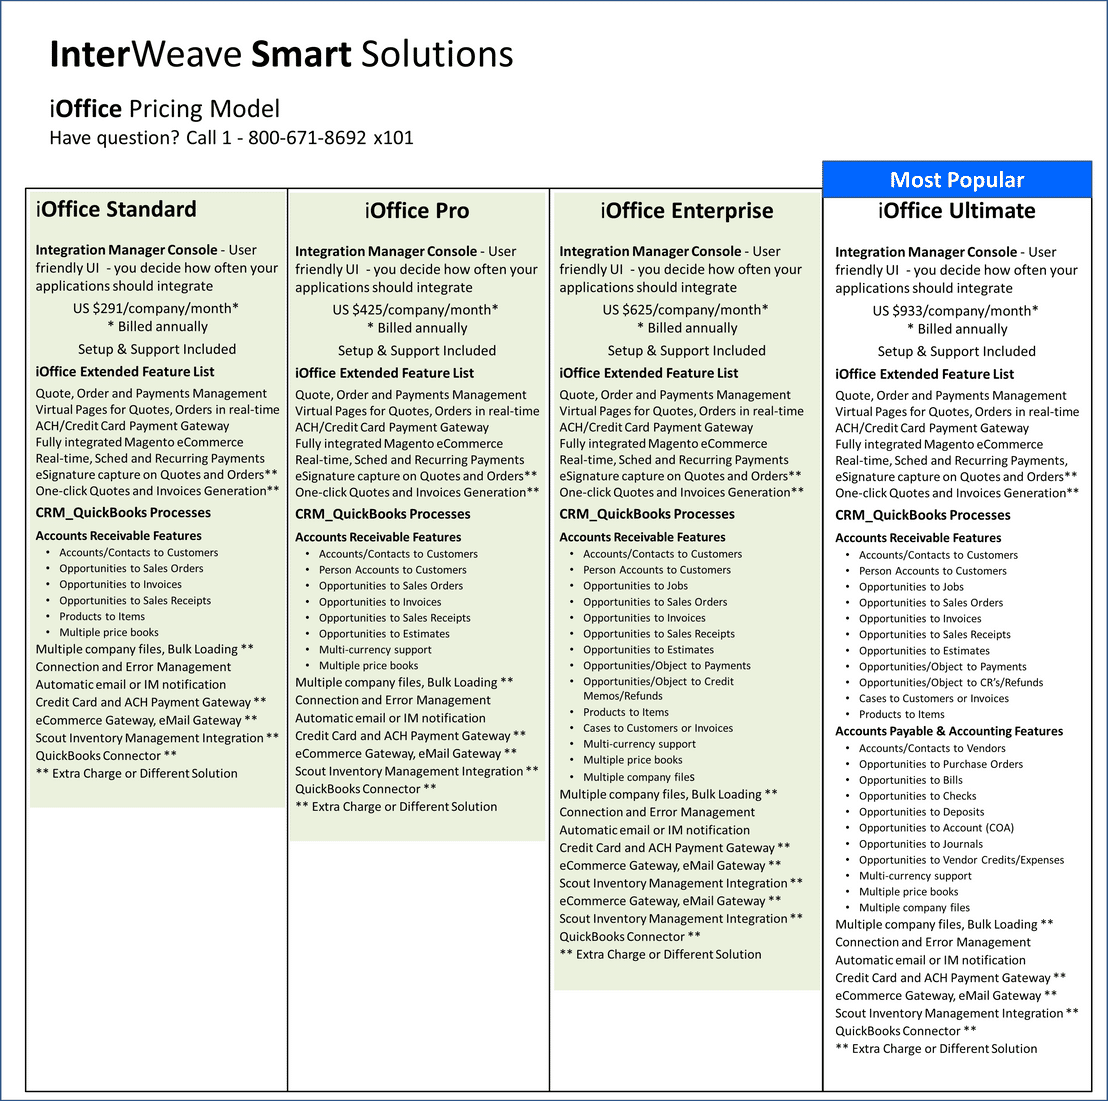 InterWeave Smart Solutions pricing